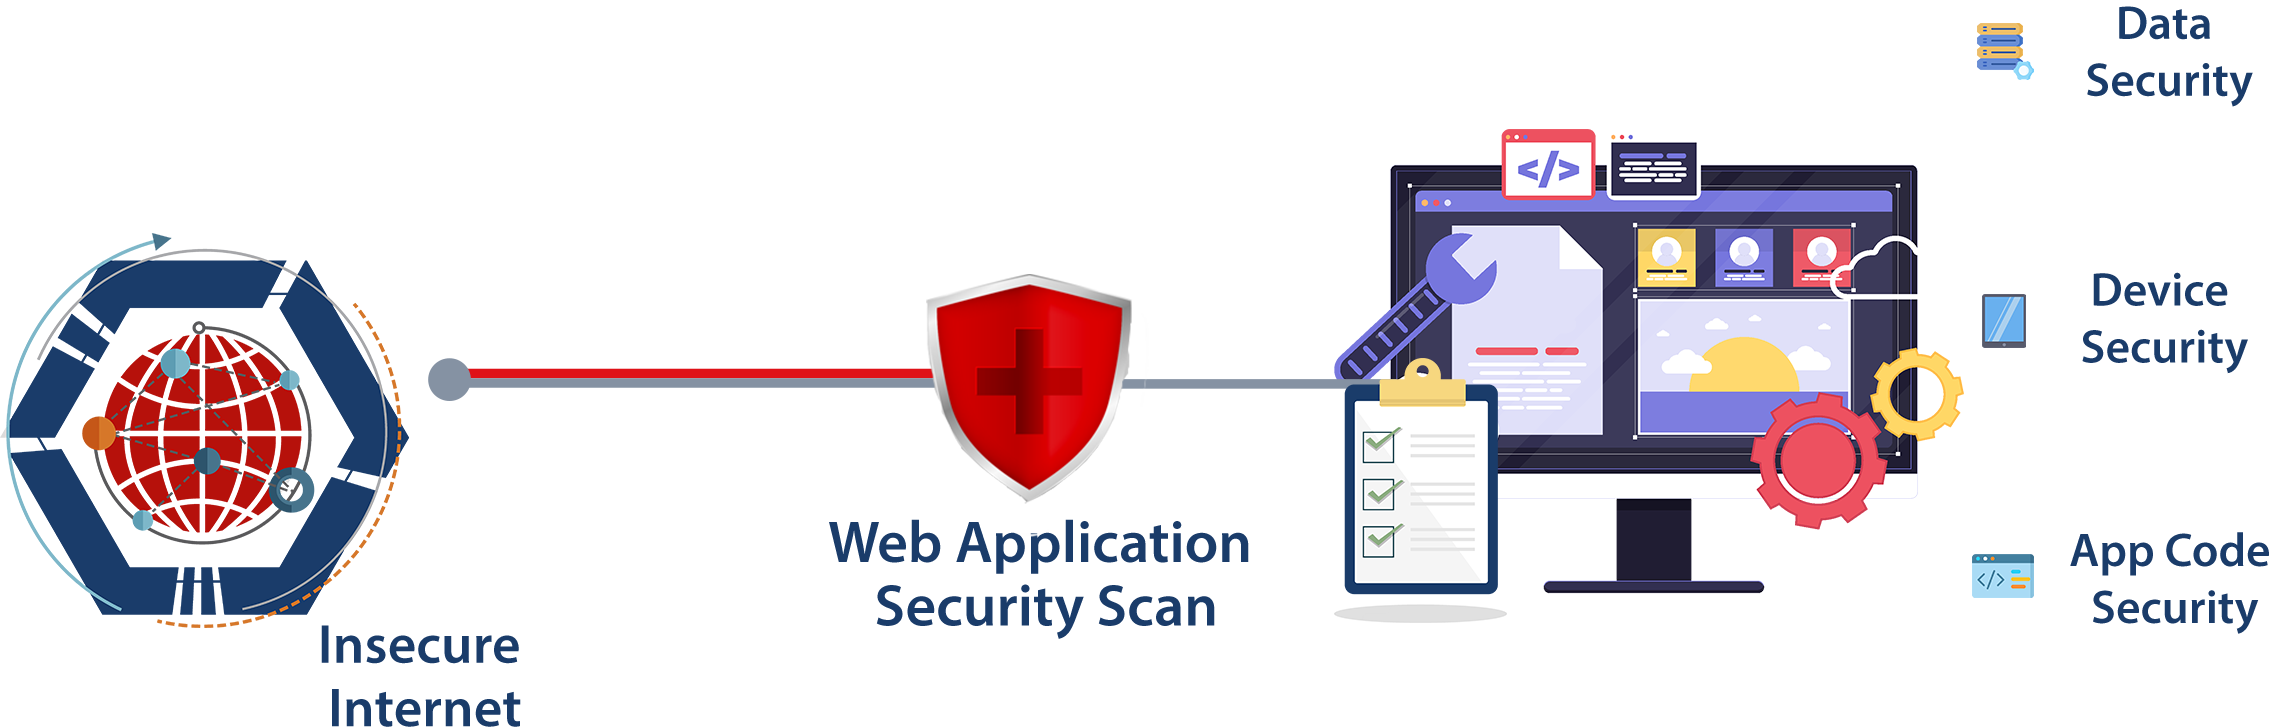 Web Application Security Testing